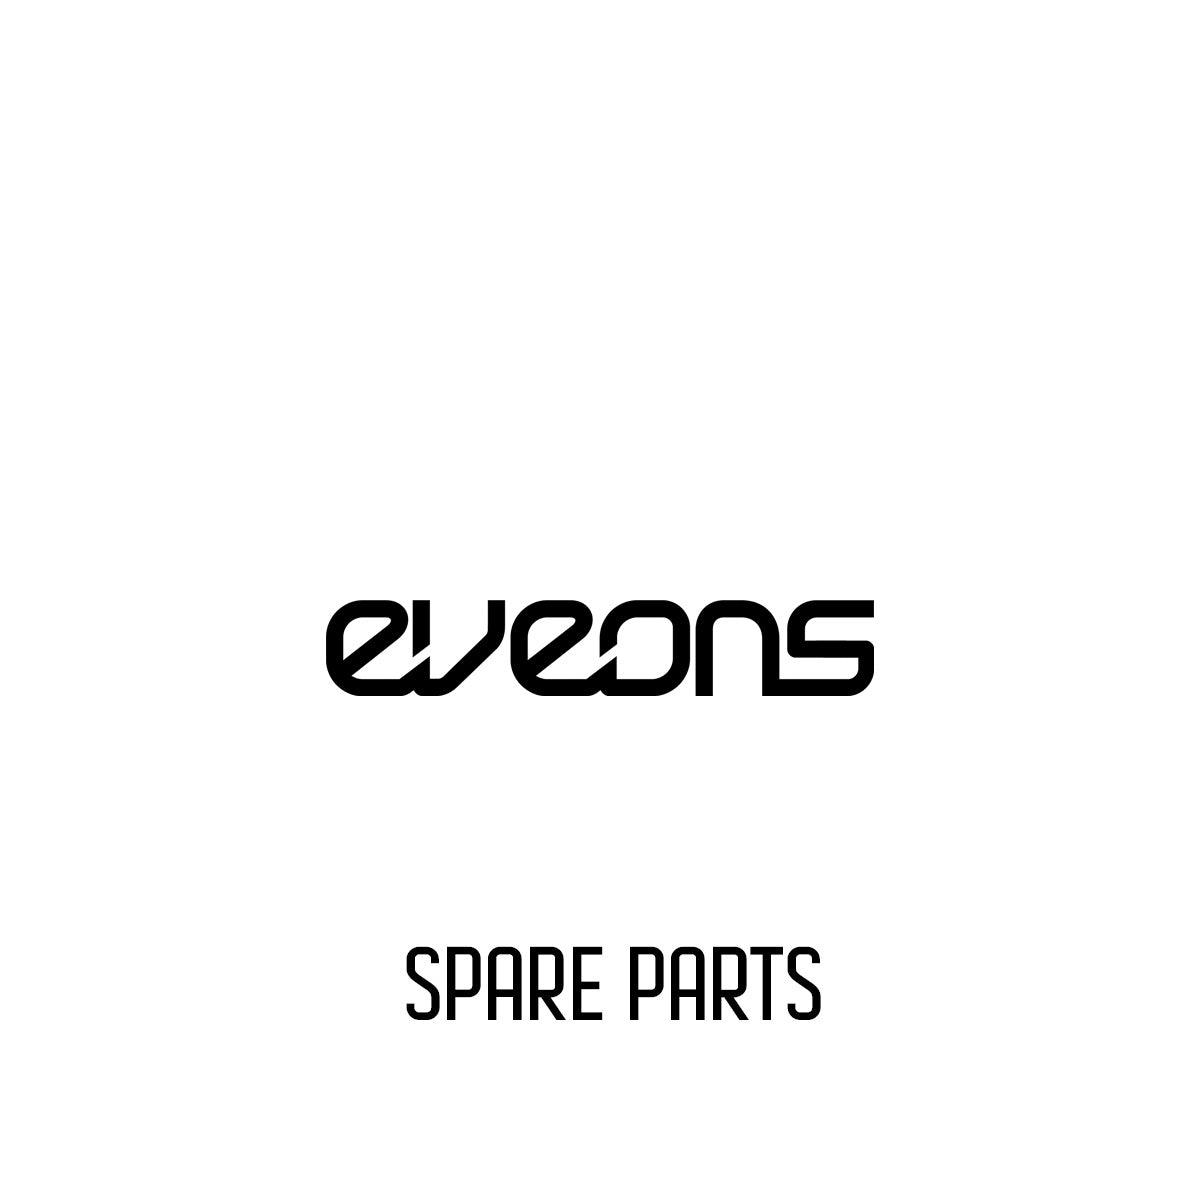 Sticker Q2 - Eveons Mobility Systems